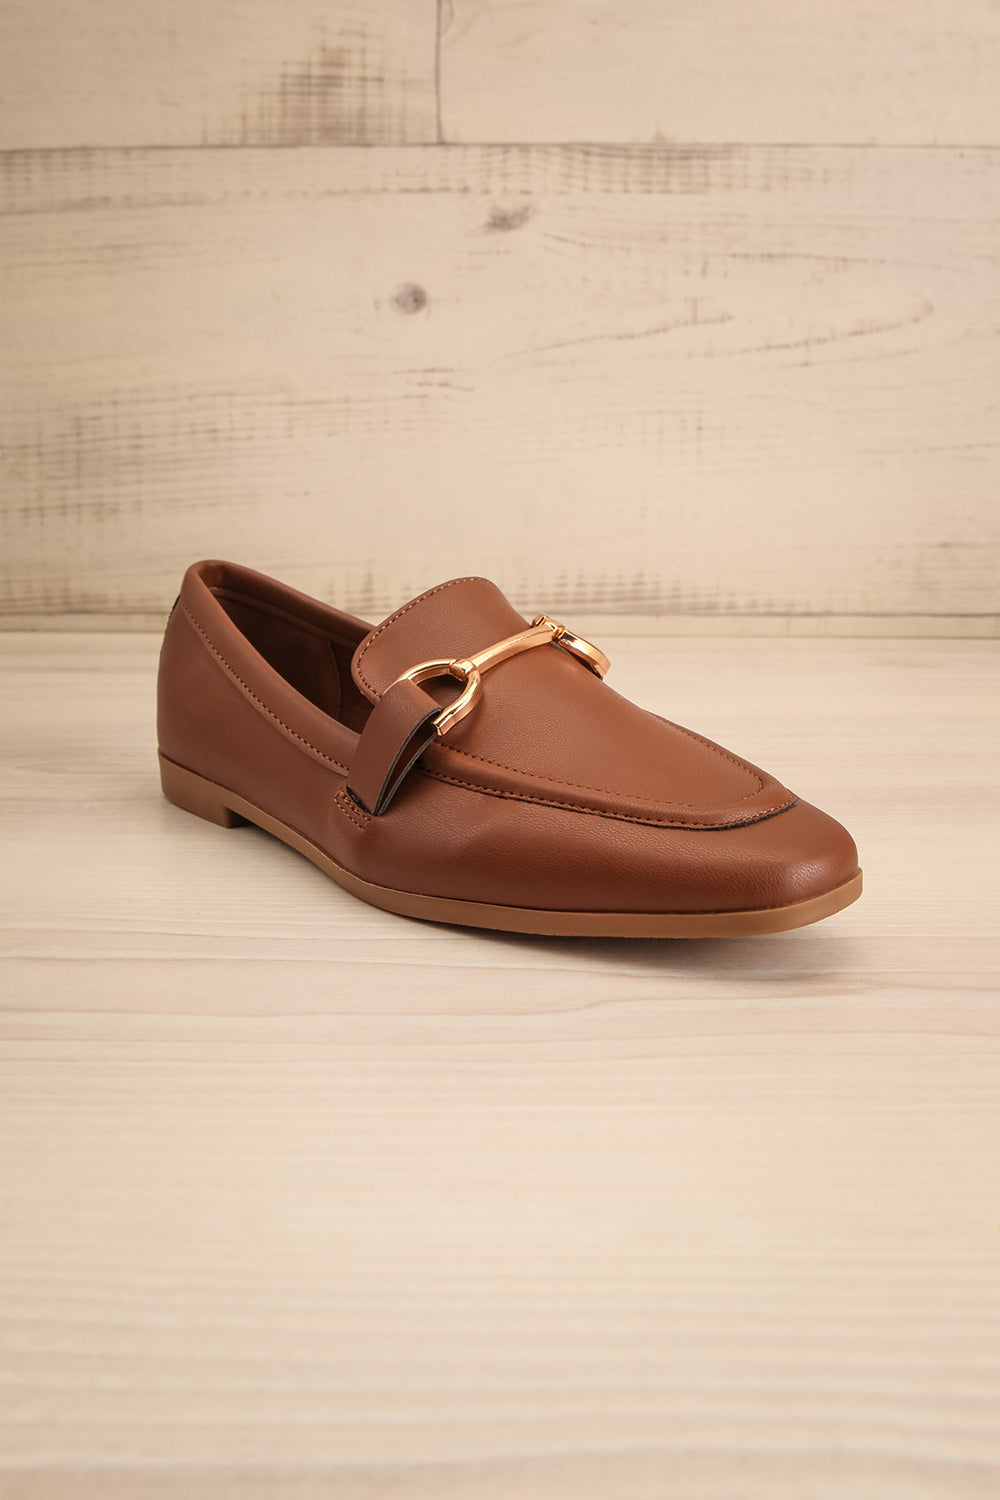 Picasso Brown Pointed Faux-Leather Loafers | La petite garçonne front view